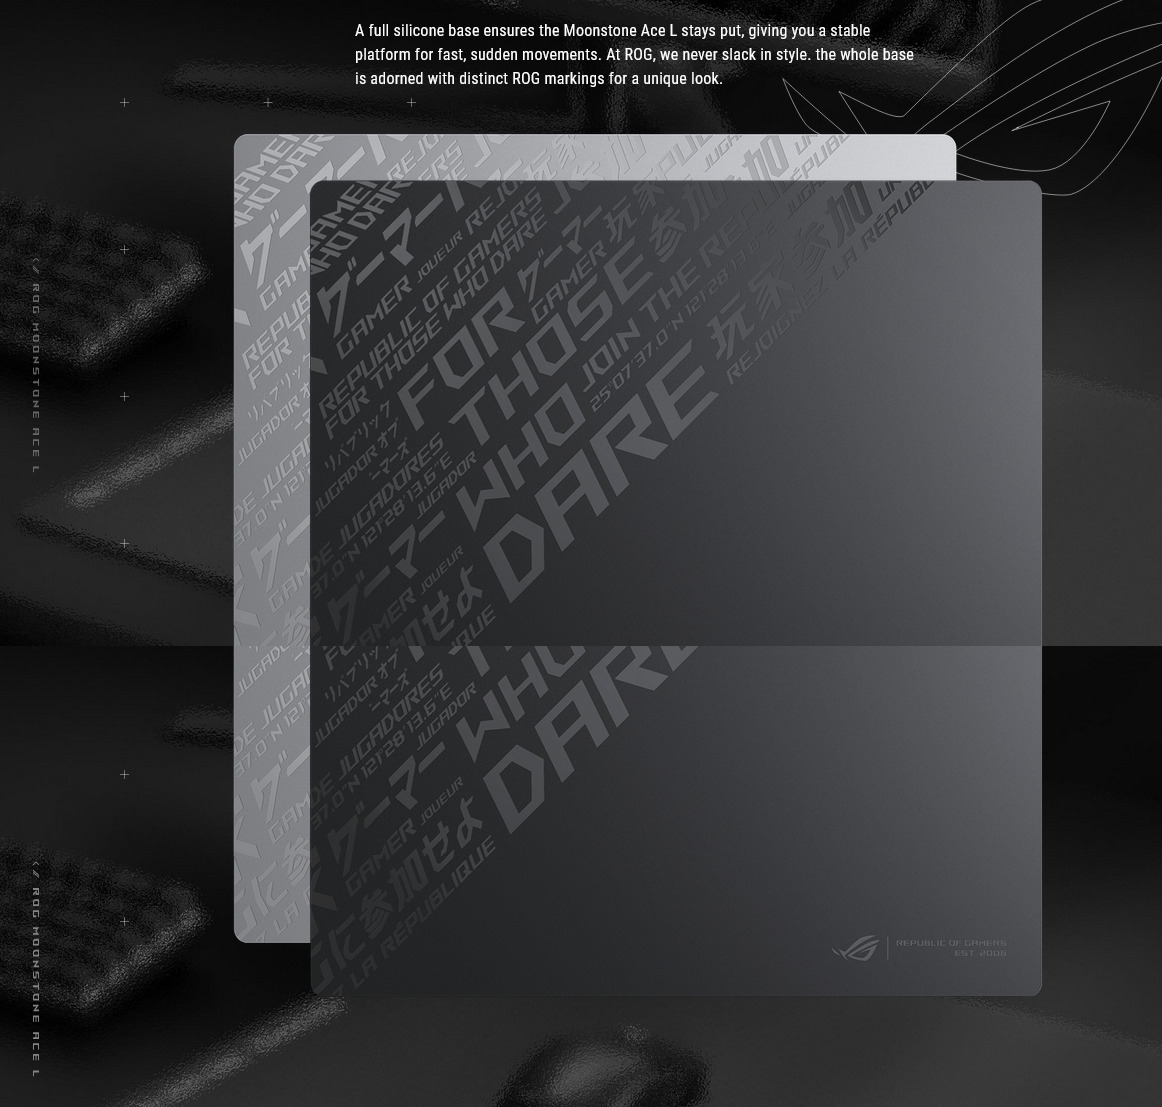 A large marketing image providing additional information about the product ASUS ROG Moonstone Ace Large Gaming Mousemat - Black - Additional alt info not provided